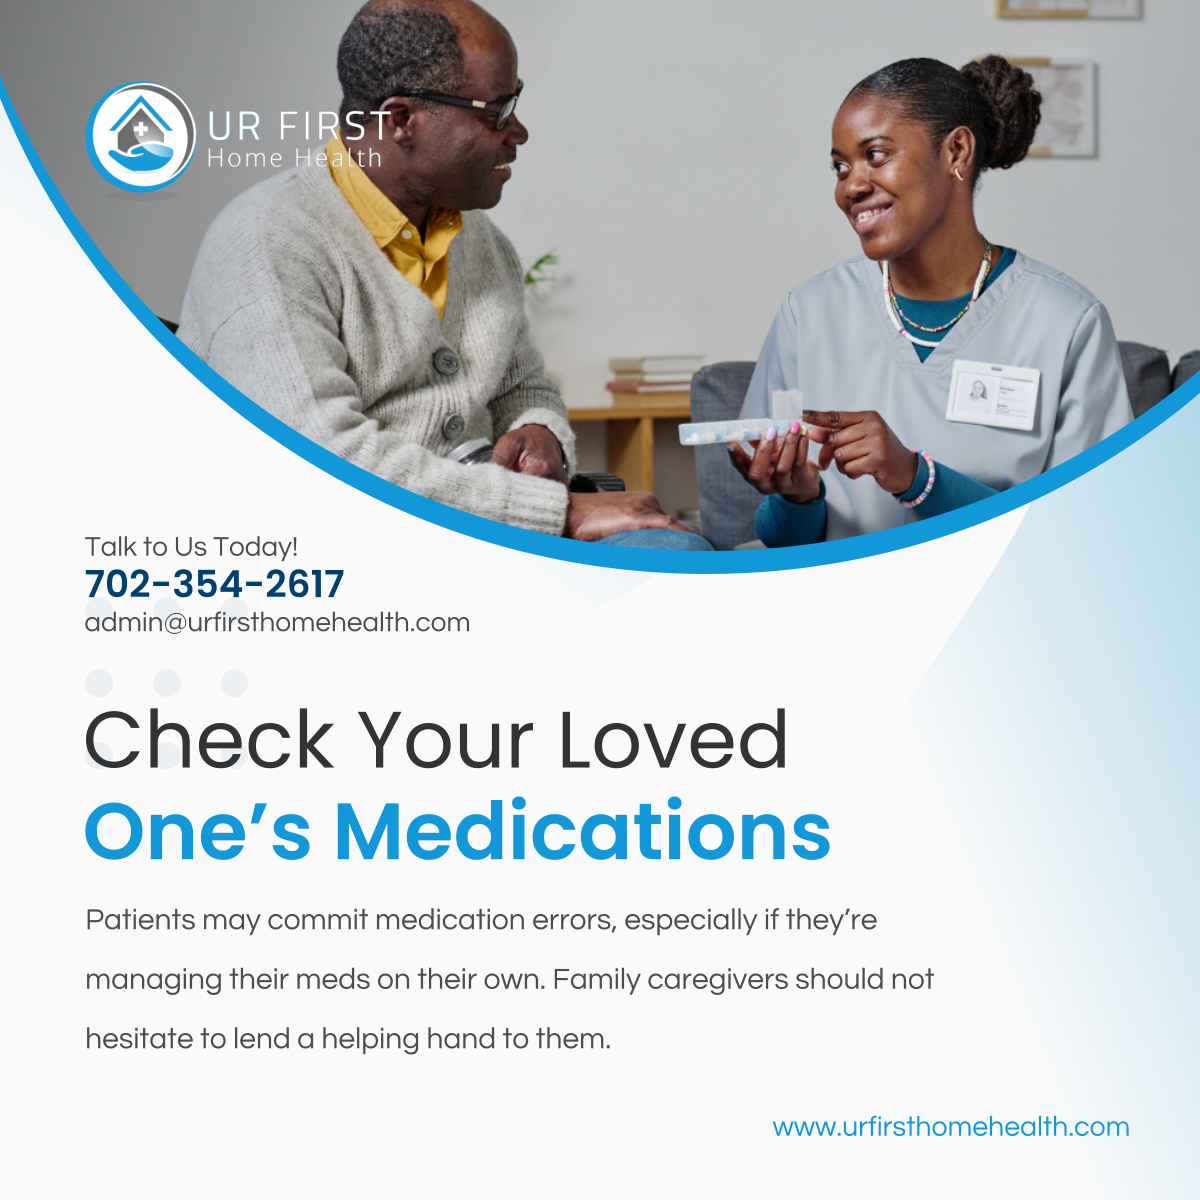 Dealing with the effects of medication mistakes is the last thing that patients would want to happen. 

Read more: business.facebook.com/photo.php?fbid…

#LasVegasNV #MedicationManagement #HomeHealthCare #HealthcareProvider #HomeHealthcareSolutions